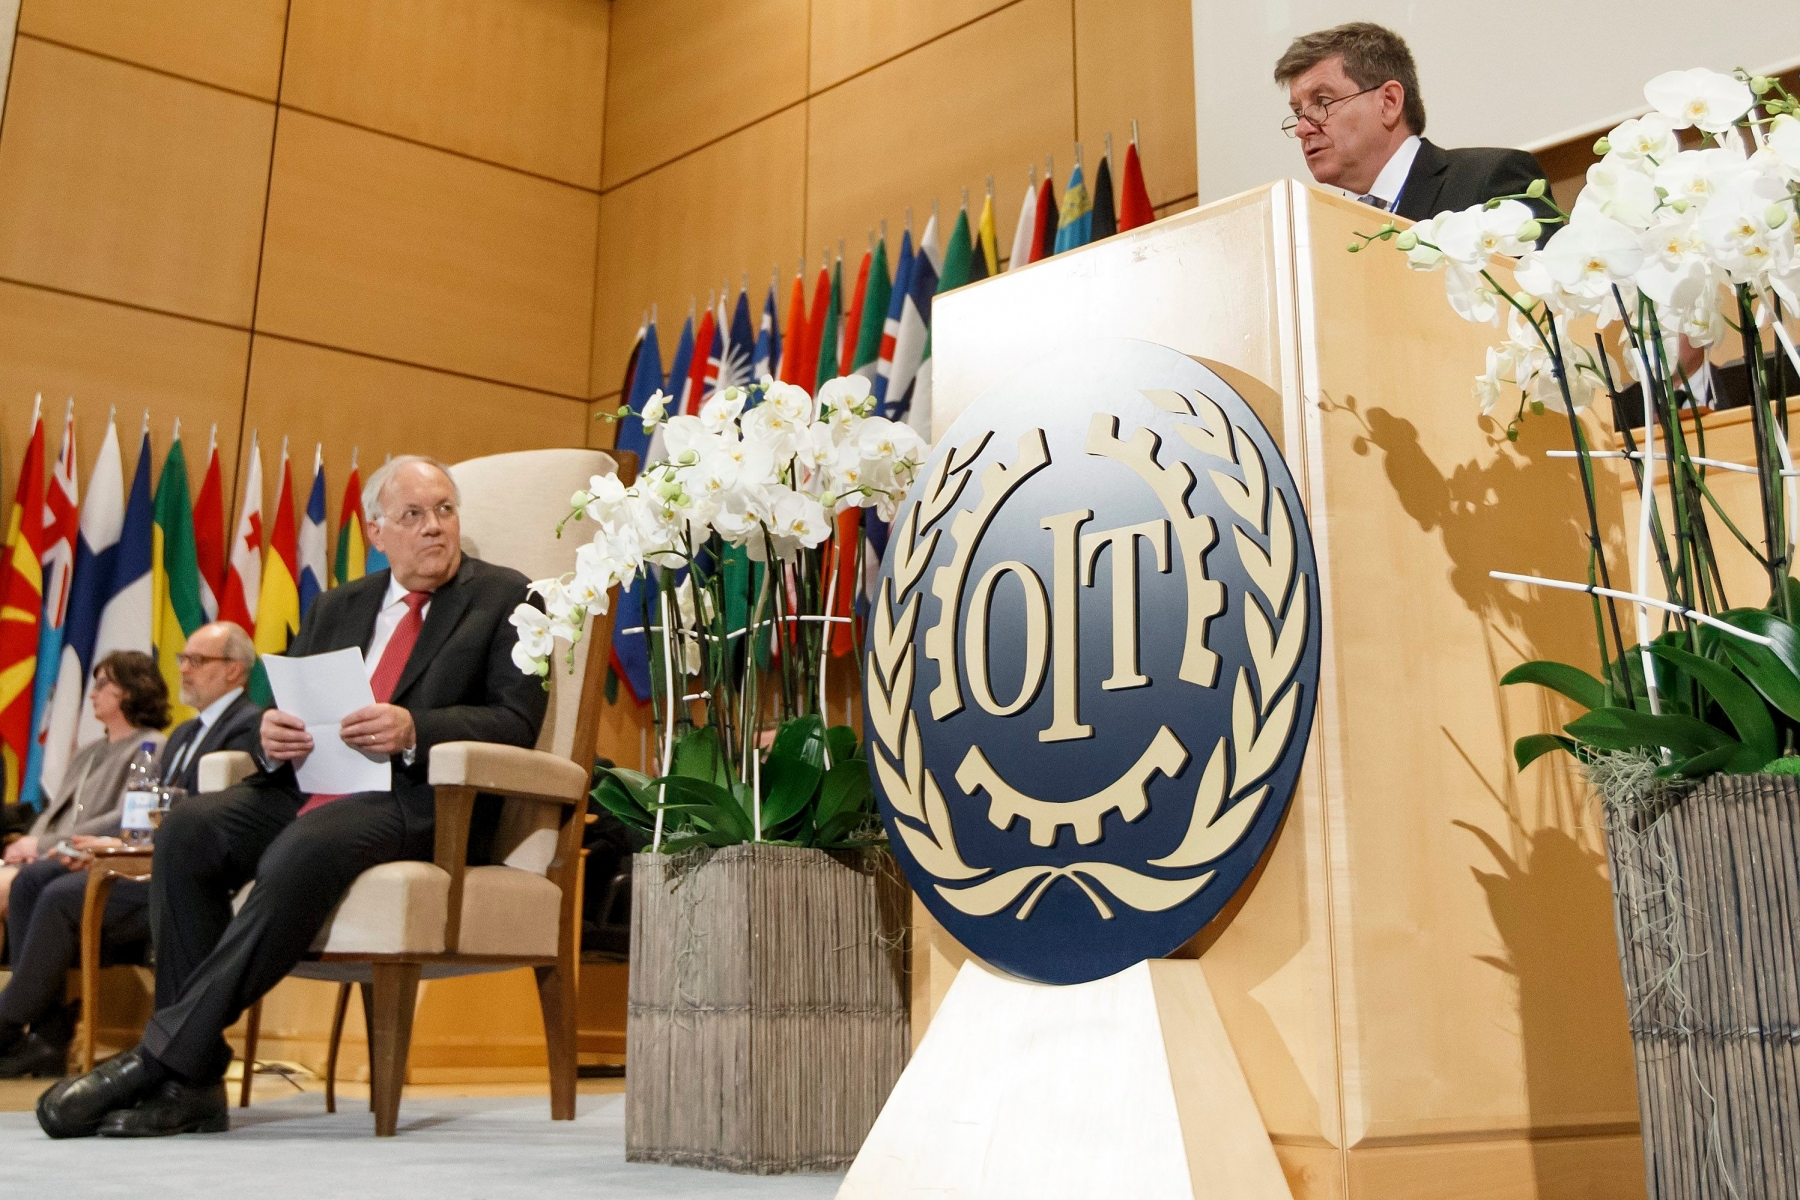 British Guy Ryder, right, General Director of the International Labour Organisation, ILO, next to Swiss President Johann Schneider-Ammann, left, delivers his speech, during the opening day of the 105th International Labor Organization, ILO, annual International Labour Conference (ILC), at the European headquarters of the United Nations in Geneva, Switzerland, Monday, May 30, 2016. (KEYSTONE/Salvatore Di Nolfi) SWITZERLAND ILO ASSEMBLY